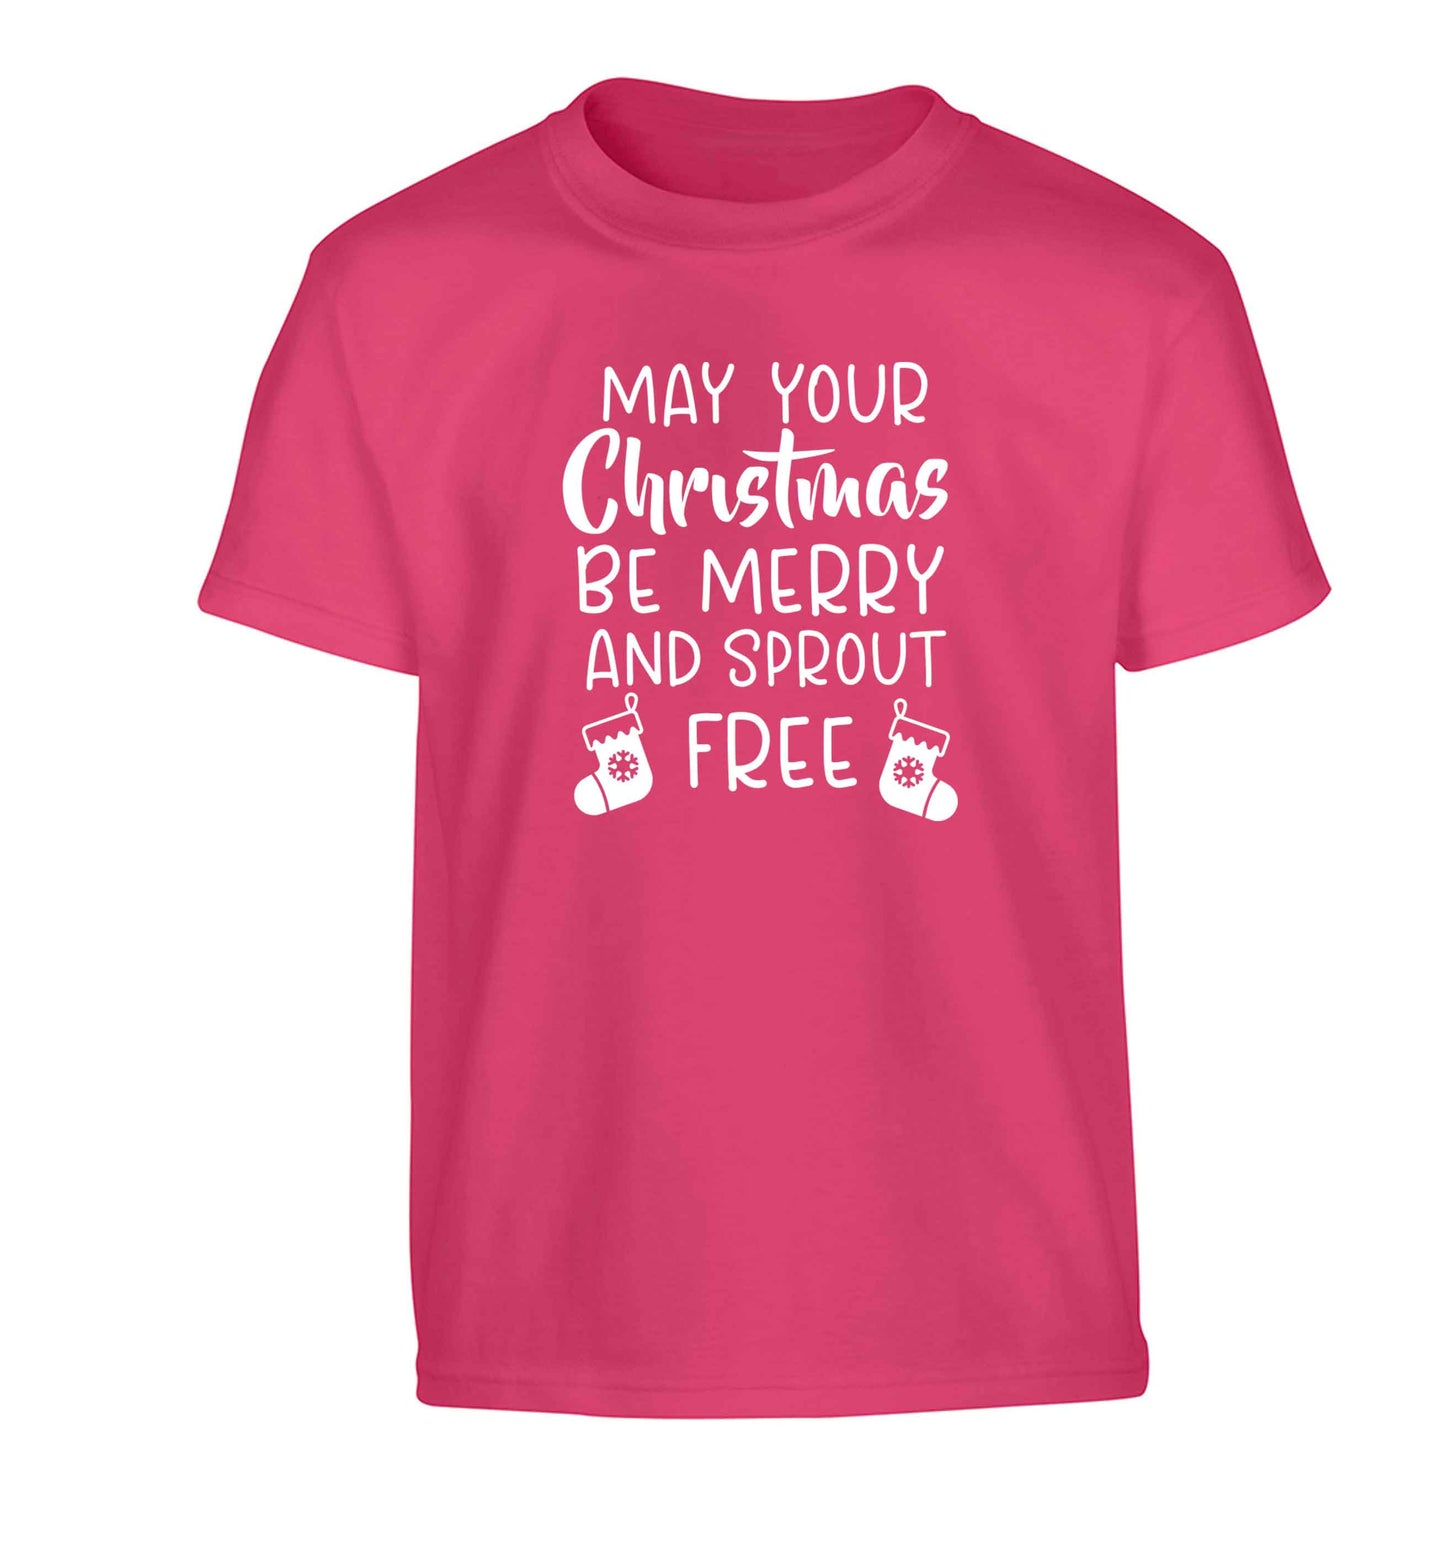 May your Christmas be merry and sprout free Children's pink Tshirt 12-13 Years